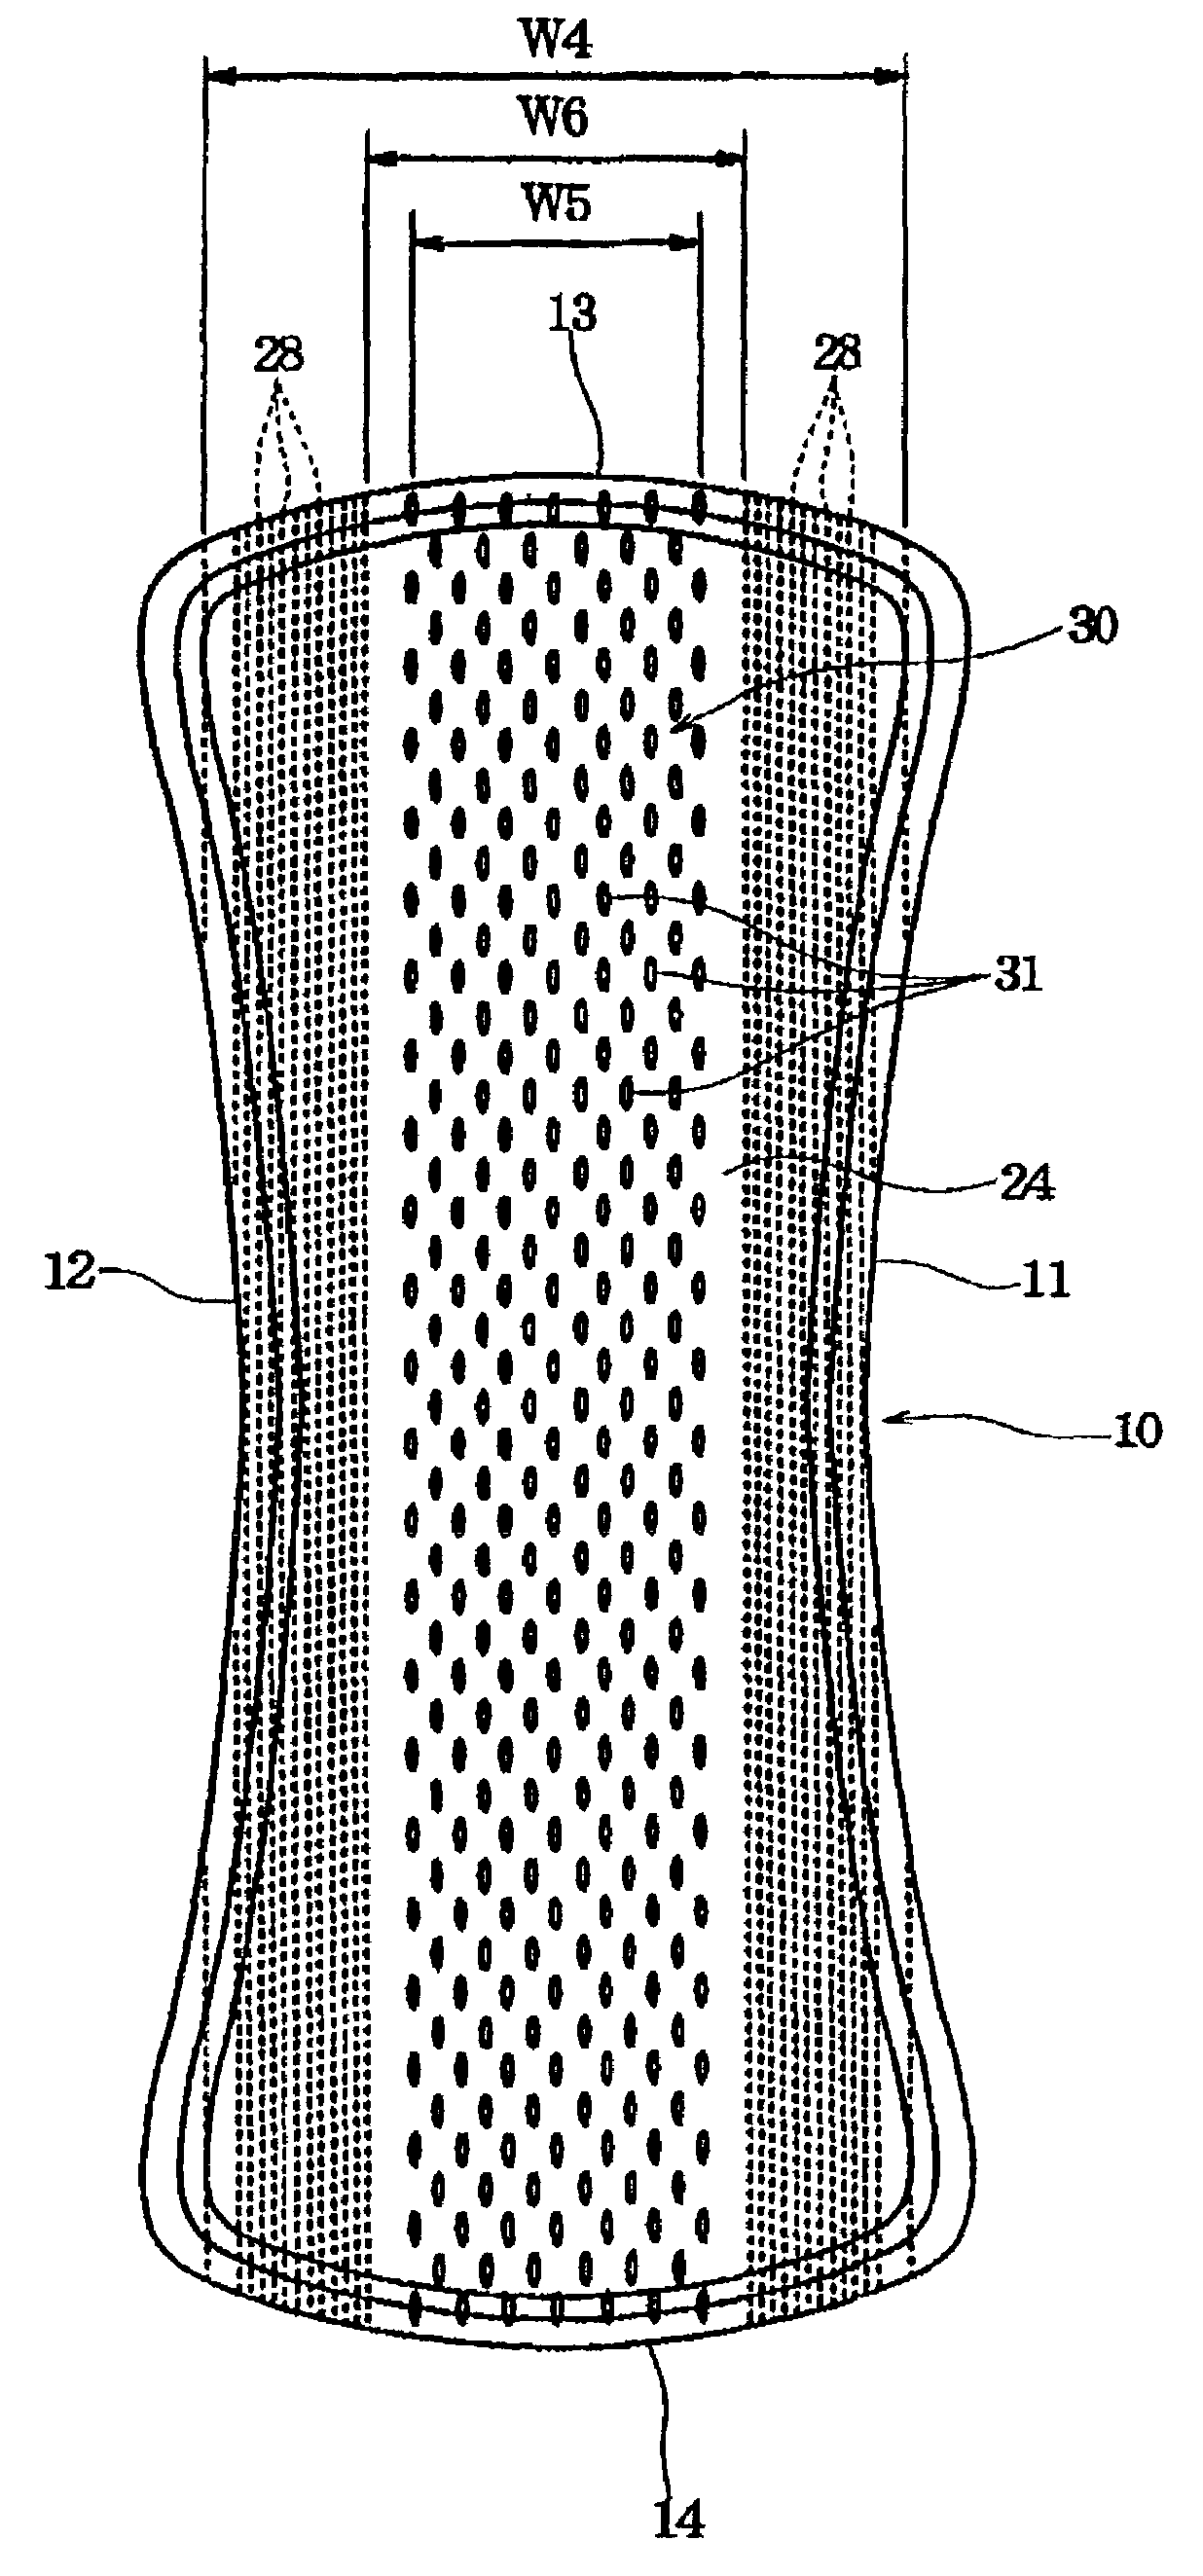 Absorbent article having passage holes in a central region